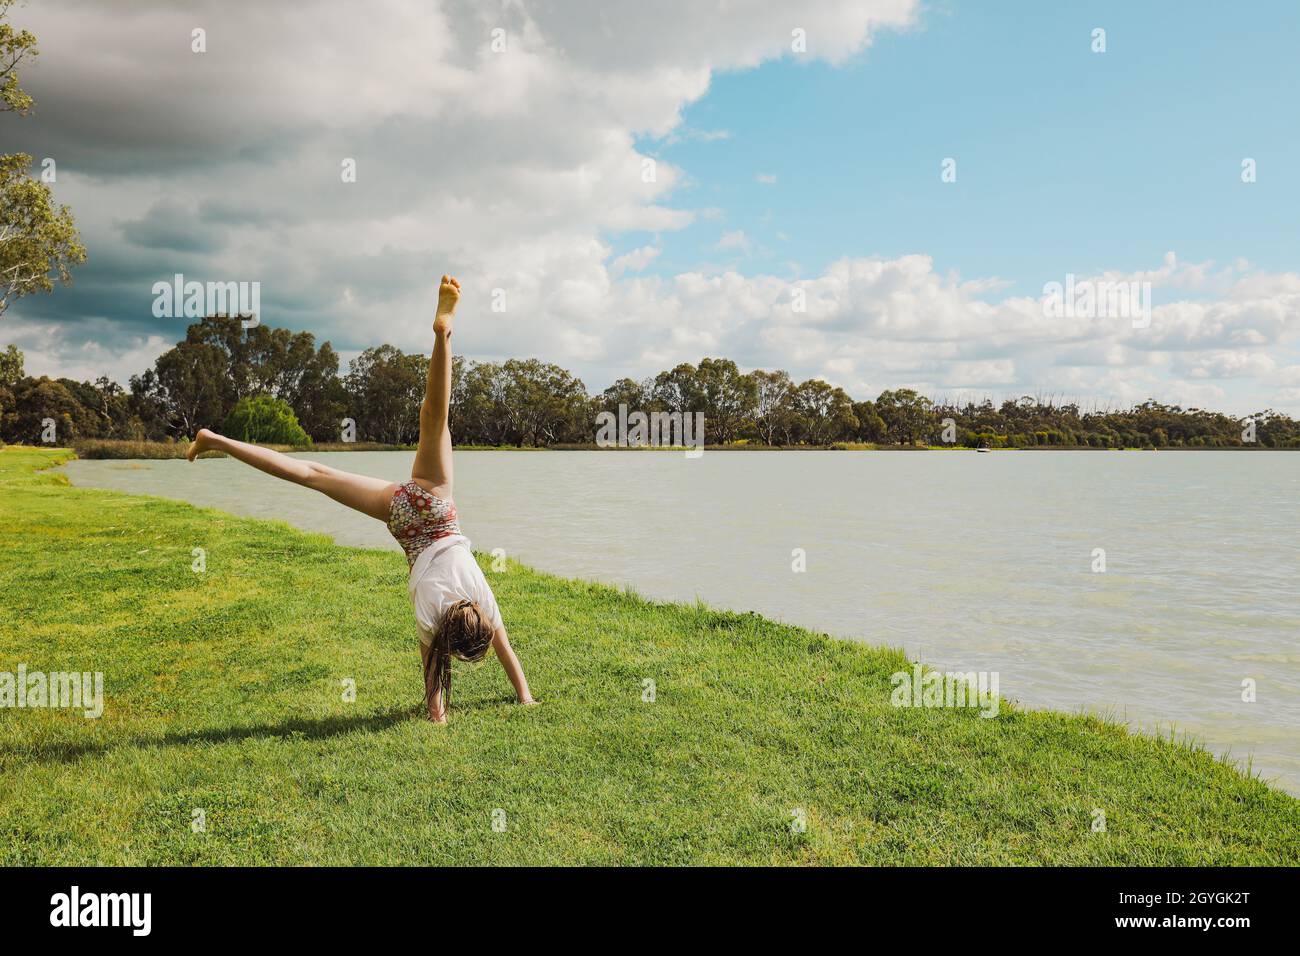 Girl doing handstand next to Lake in Boort, Victoria Australia Stock Photo